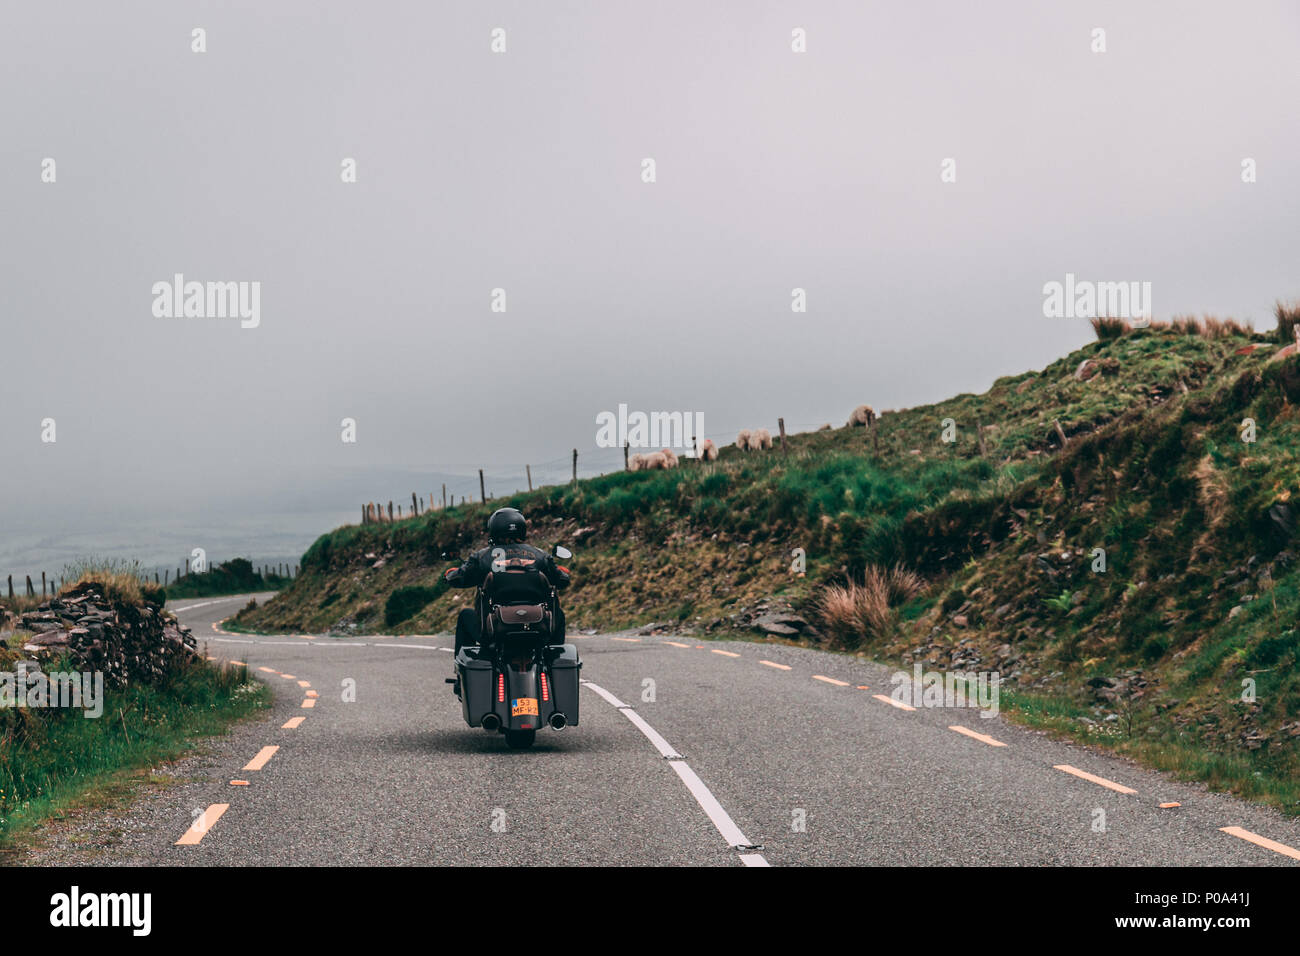 June 5th, 2018, Conor Pass, Ireland - people riding in motorcycles along the scenic road to Conor Pass in county Kerry, Ireland Stock Photo